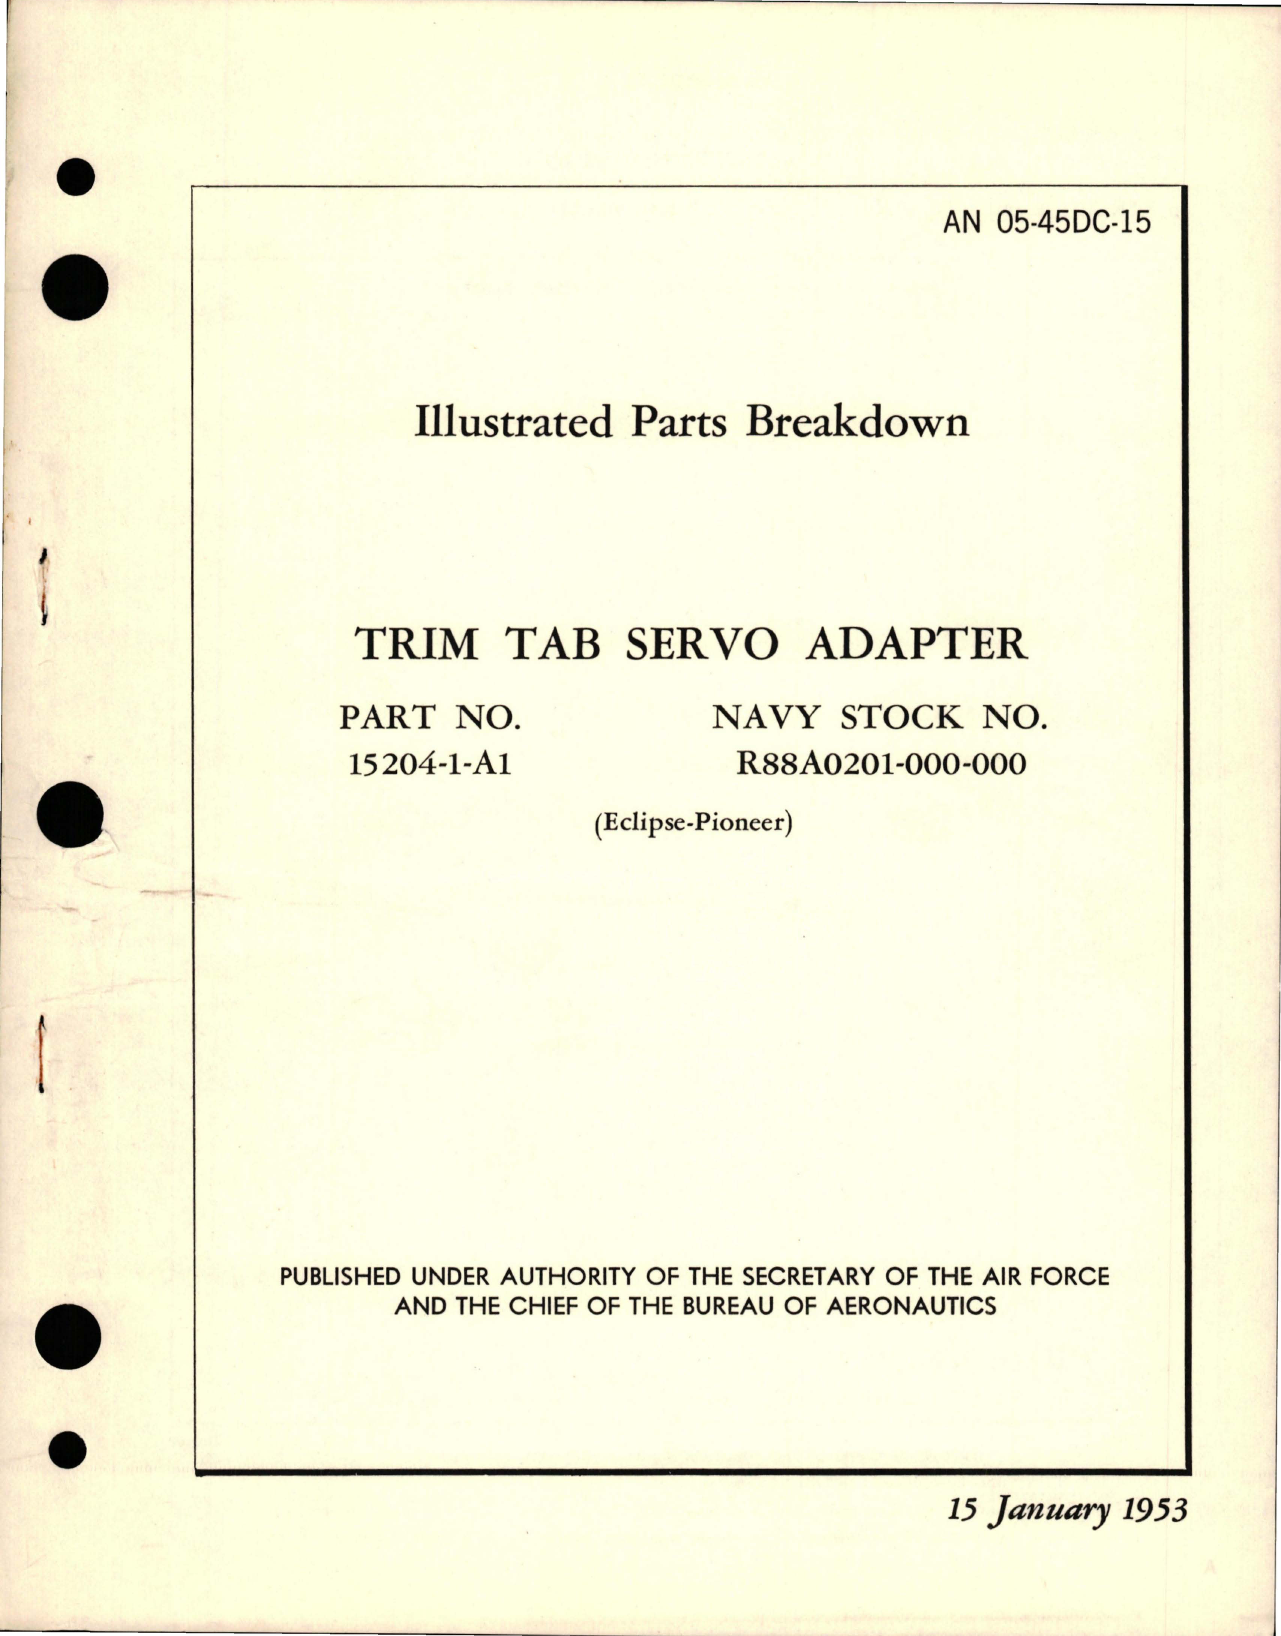 Sample page 1 from AirCorps Library document: Illustrated Parts Breakdown for Trim Tab Servo Adapter - Part 15204-1-A1